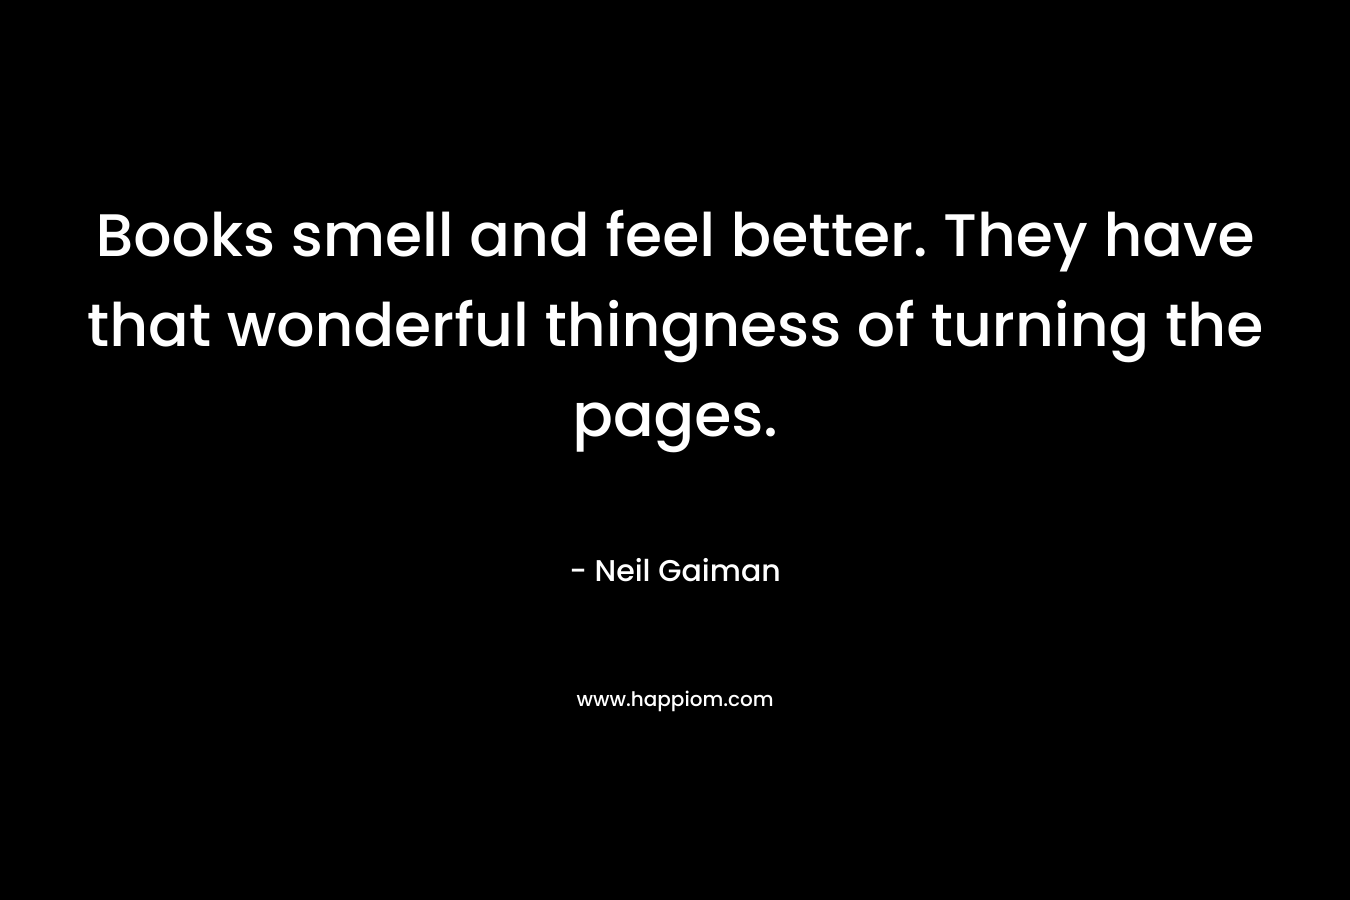 Books smell and feel better. They have that wonderful thingness of turning the pages. – Neil Gaiman